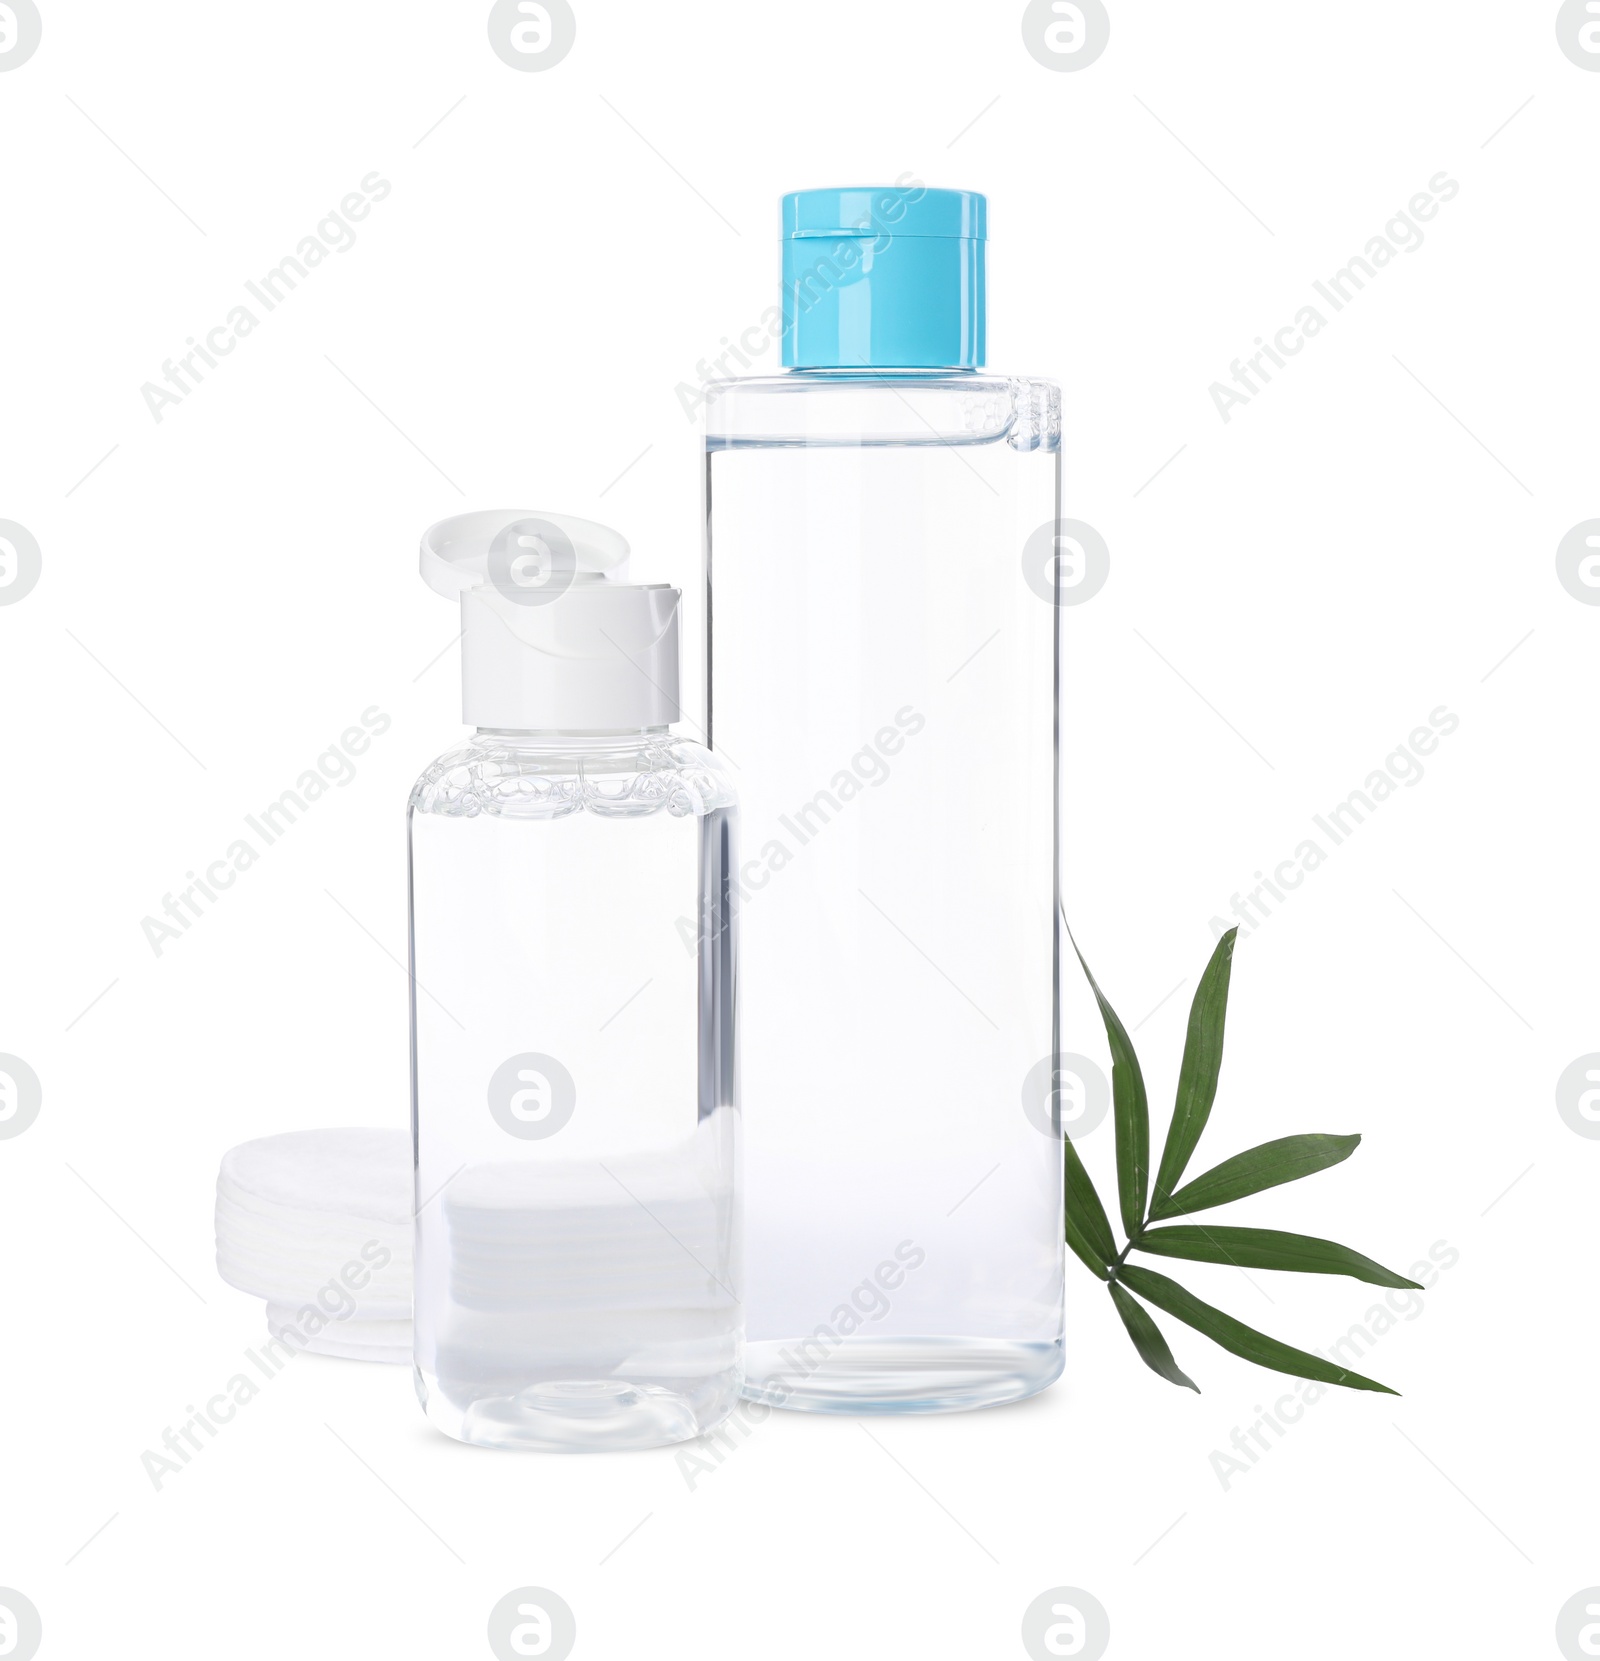 Photo of Bottles of micellar cleansing water, cotton pads and green twig on white background